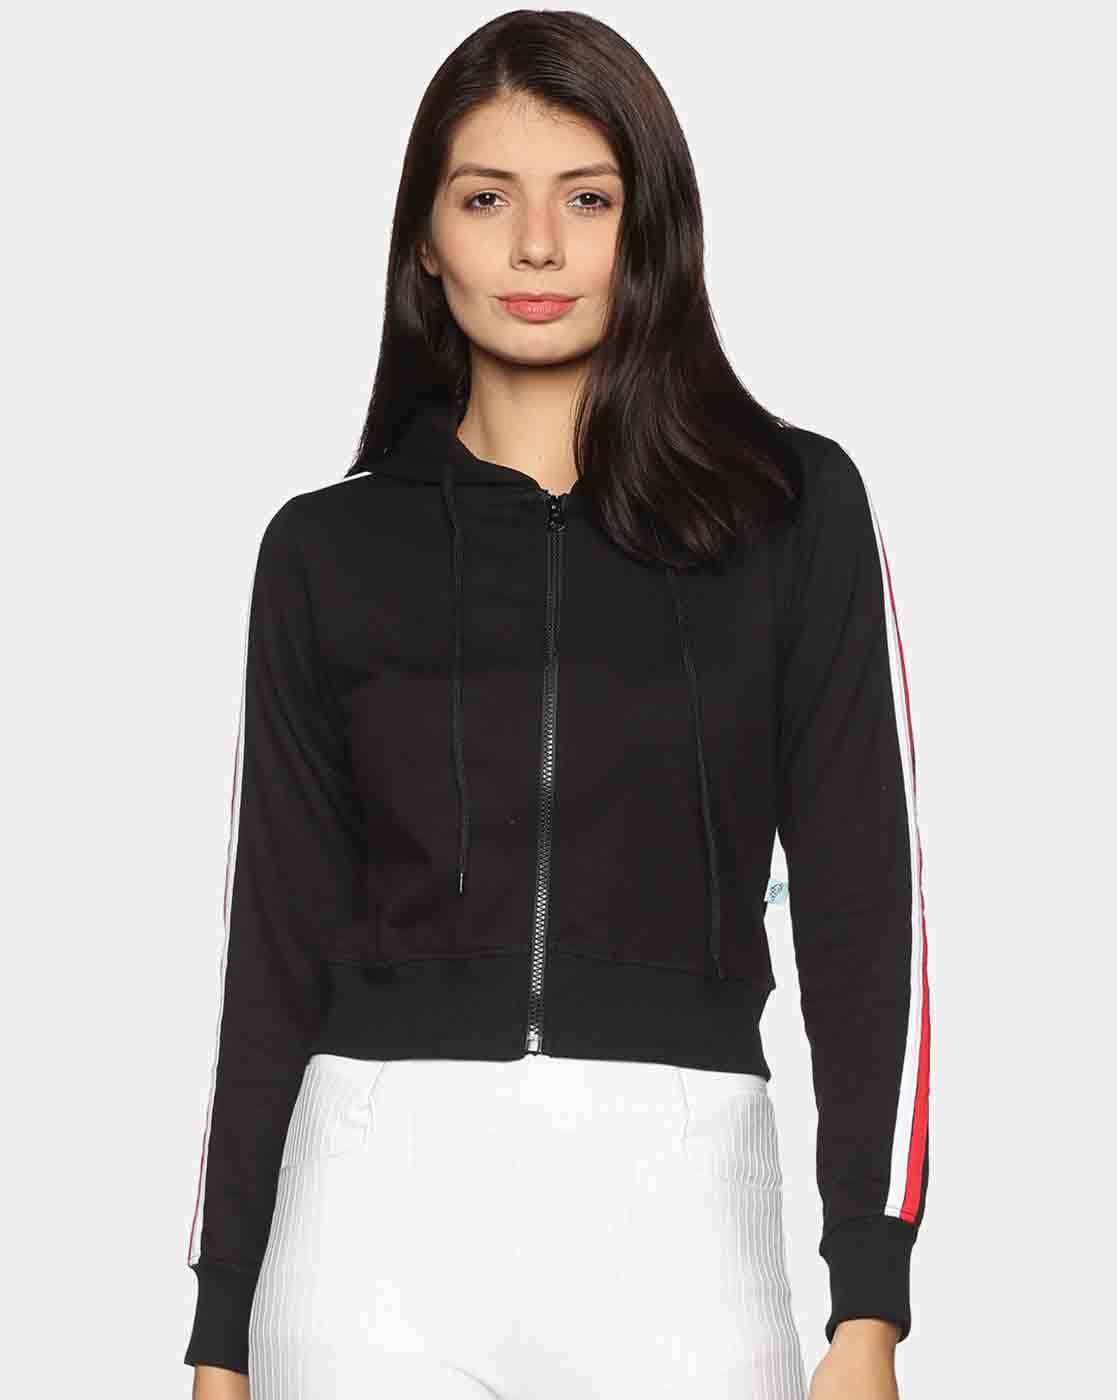 Zip-Front Hoodie with Contrast Taping